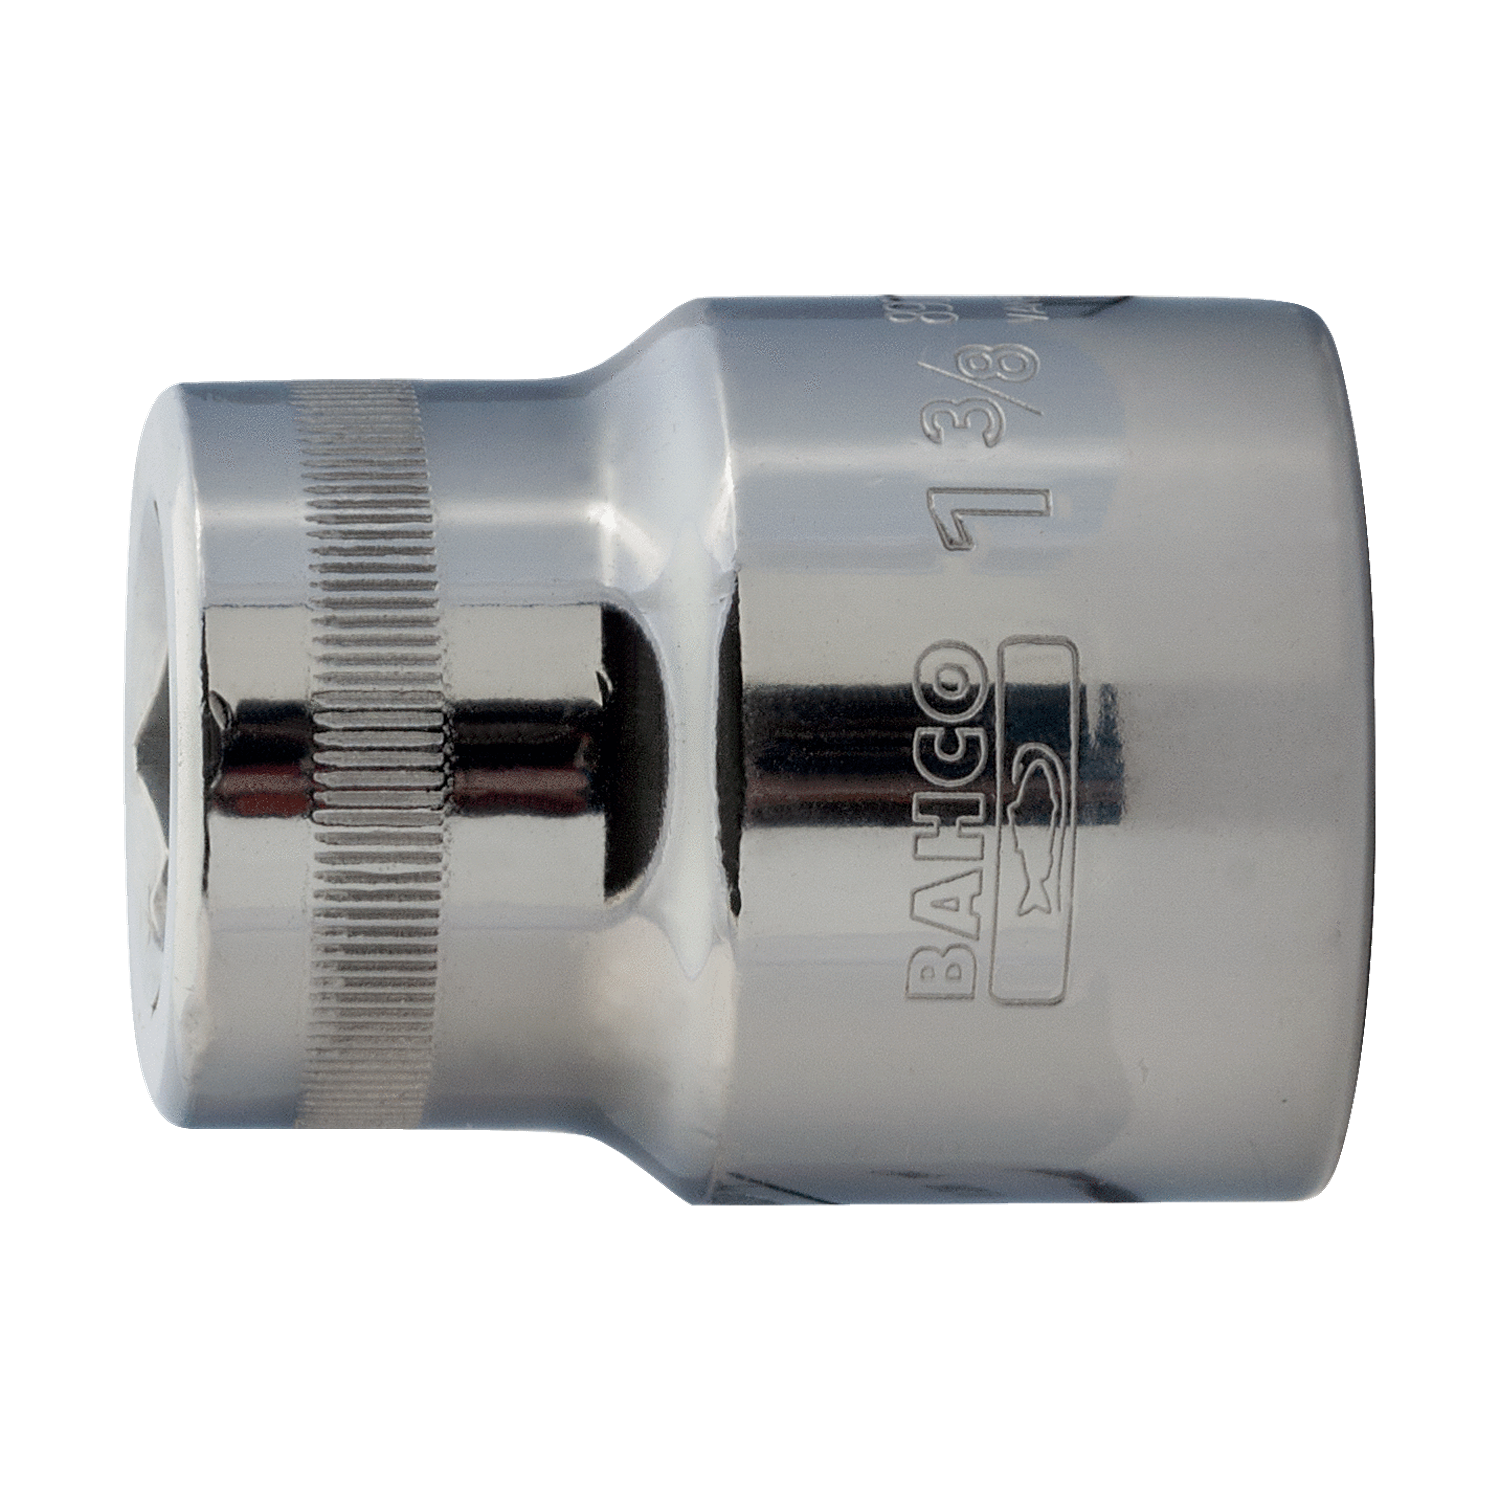 BAHCO 8900SZ 3/4" Square Drive Socket With Imperial Hex Profile - Premium Square Drive Socket from BAHCO - Shop now at Yew Aik.